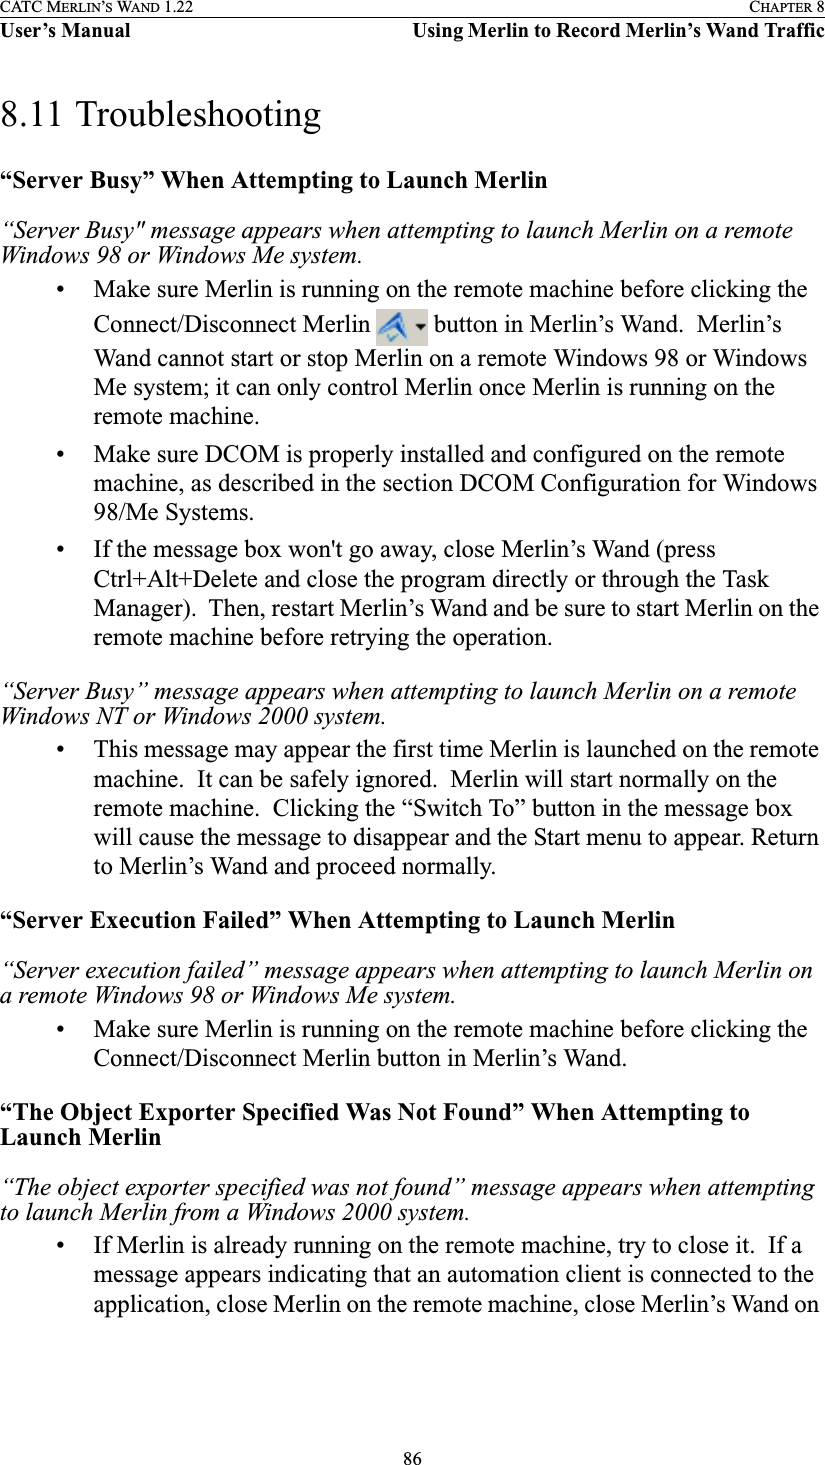 86CATC MERLIN’S WAND 1.22 CHAPTER 8User’s Manual Using Merlin to Record Merlin’s Wand Traffic8.11 Troubleshooting“Server Busy” When Attempting to Launch Merlin“Server Busy&quot; message appears when attempting to launch Merlin on a remote Windows 98 or Windows Me system.• Make sure Merlin is running on the remote machine before clicking the Connect/Disconnect Merlin   button in Merlin’s Wand.  Merlin’s Wand cannot start or stop Merlin on a remote Windows 98 or Windows Me system; it can only control Merlin once Merlin is running on the remote machine. • Make sure DCOM is properly installed and configured on the remote machine, as described in the section DCOM Configuration for Windows 98/Me Systems.• If the message box won&apos;t go away, close Merlin’s Wand (press Ctrl+Alt+Delete and close the program directly or through the Task Manager).  Then, restart Merlin’s Wand and be sure to start Merlin on the remote machine before retrying the operation.“Server Busy” message appears when attempting to launch Merlin on a remote Windows NT or Windows 2000 system.• This message may appear the first time Merlin is launched on the remote machine.  It can be safely ignored.  Merlin will start normally on the remote machine.  Clicking the “Switch To” button in the message box will cause the message to disappear and the Start menu to appear. Return to Merlin’s Wand and proceed normally.“Server Execution Failed” When Attempting to Launch Merlin“Server execution failed” message appears when attempting to launch Merlin on a remote Windows 98 or Windows Me system.• Make sure Merlin is running on the remote machine before clicking the Connect/Disconnect Merlin button in Merlin’s Wand.“The Object Exporter Specified Was Not Found” When Attempting to Launch Merlin“The object exporter specified was not found” message appears when attempting to launch Merlin from a Windows 2000 system.• If Merlin is already running on the remote machine, try to close it.  If a message appears indicating that an automation client is connected to the application, close Merlin on the remote machine, close Merlin’s Wand on 